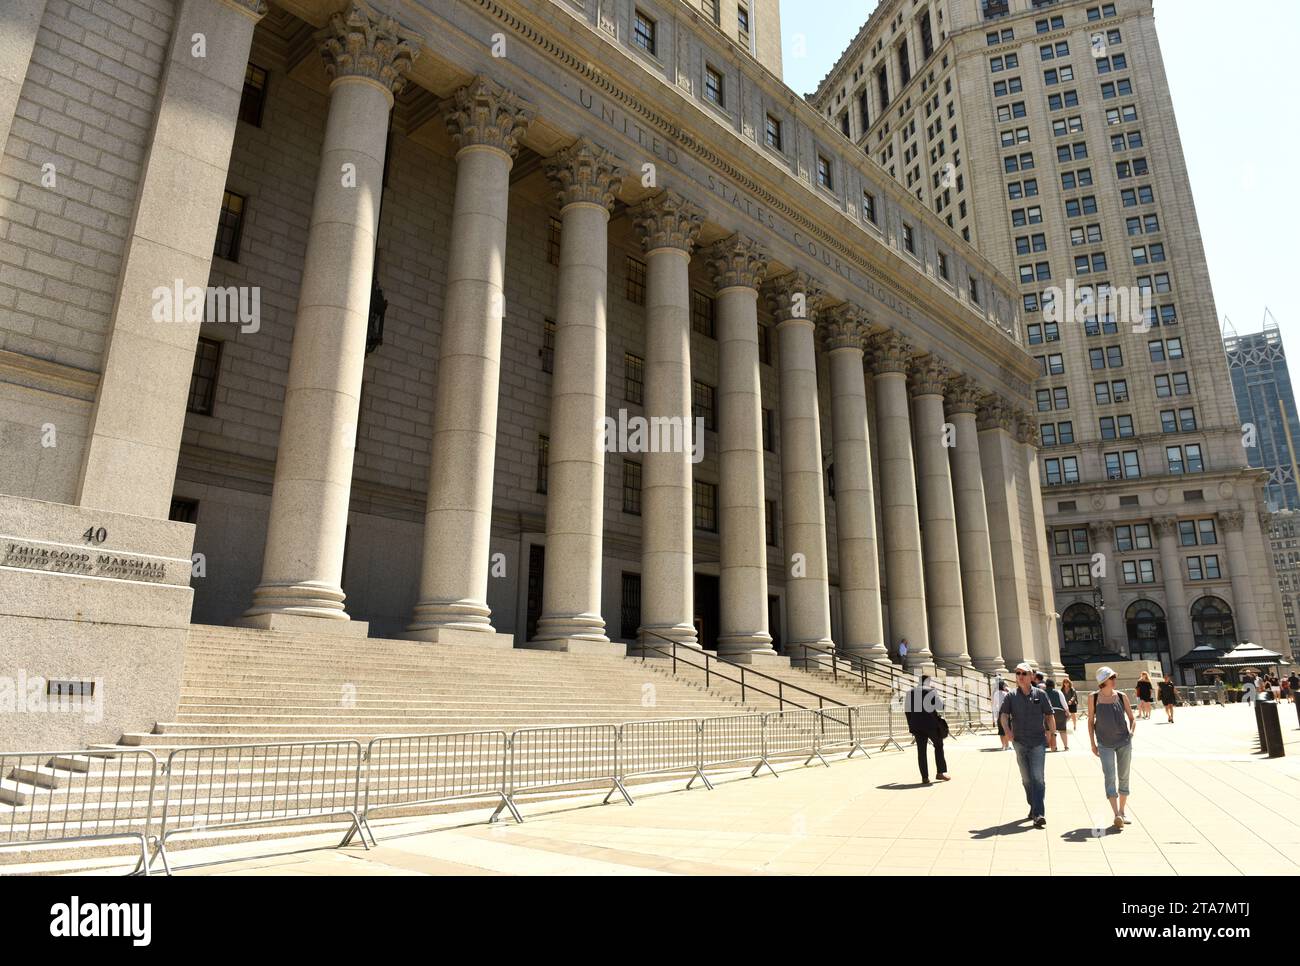 New York, USA - 24. Mai 2018: Menschen in der Nähe des Thurgood Marshall Courthouse. United States Court House in NYC Stockfoto